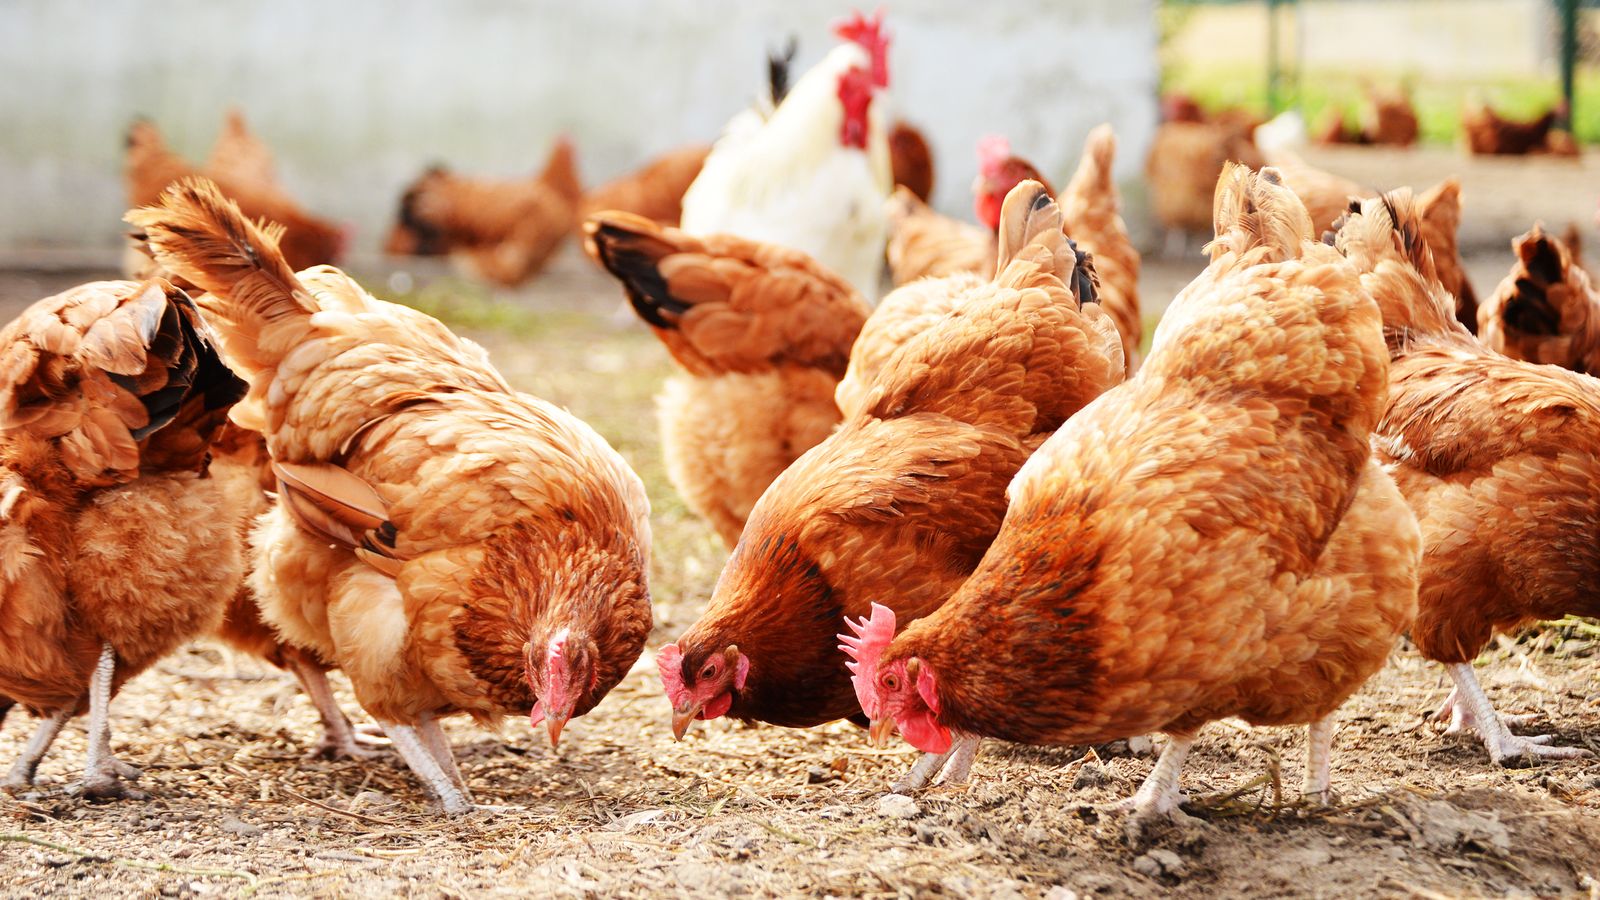 27 000 Chickens To Be Culled After Bird Flu Detected On